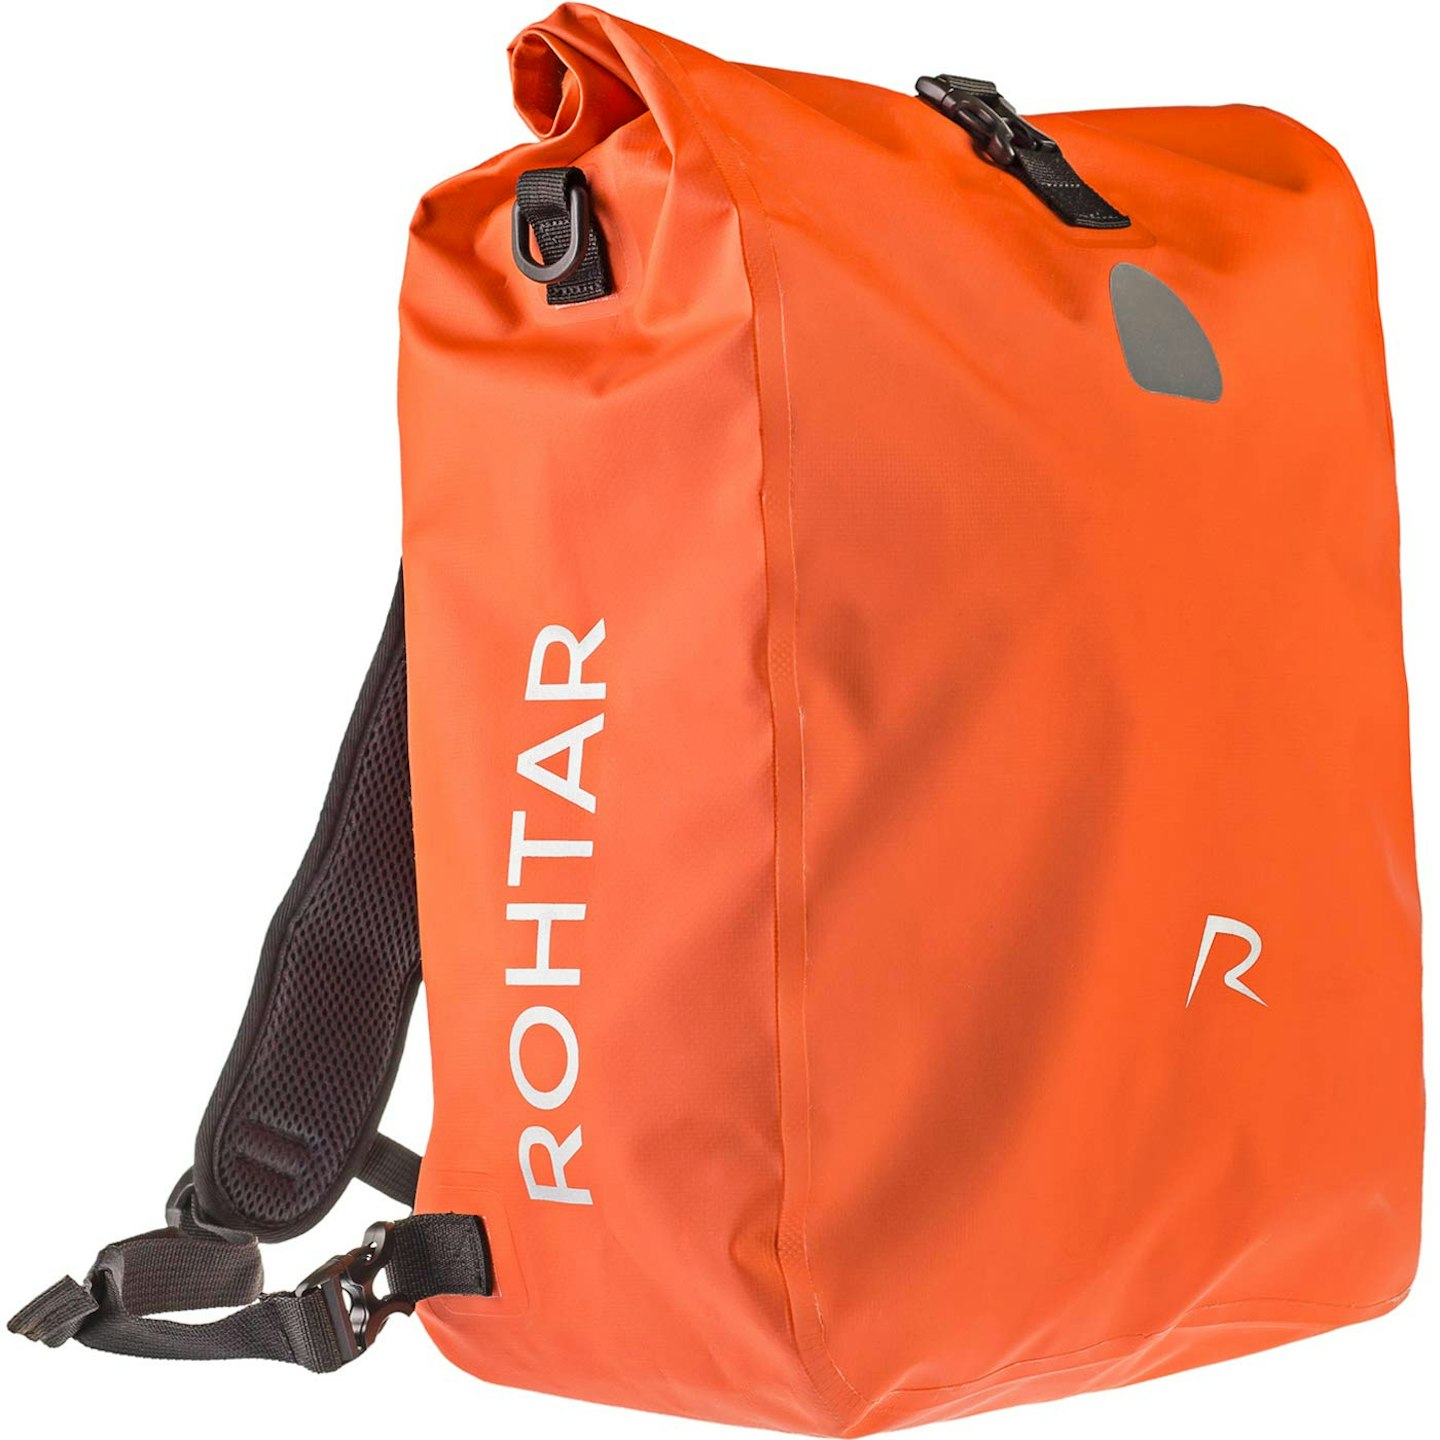 Rohtar - The Ideal Travel Bag for Cyclists